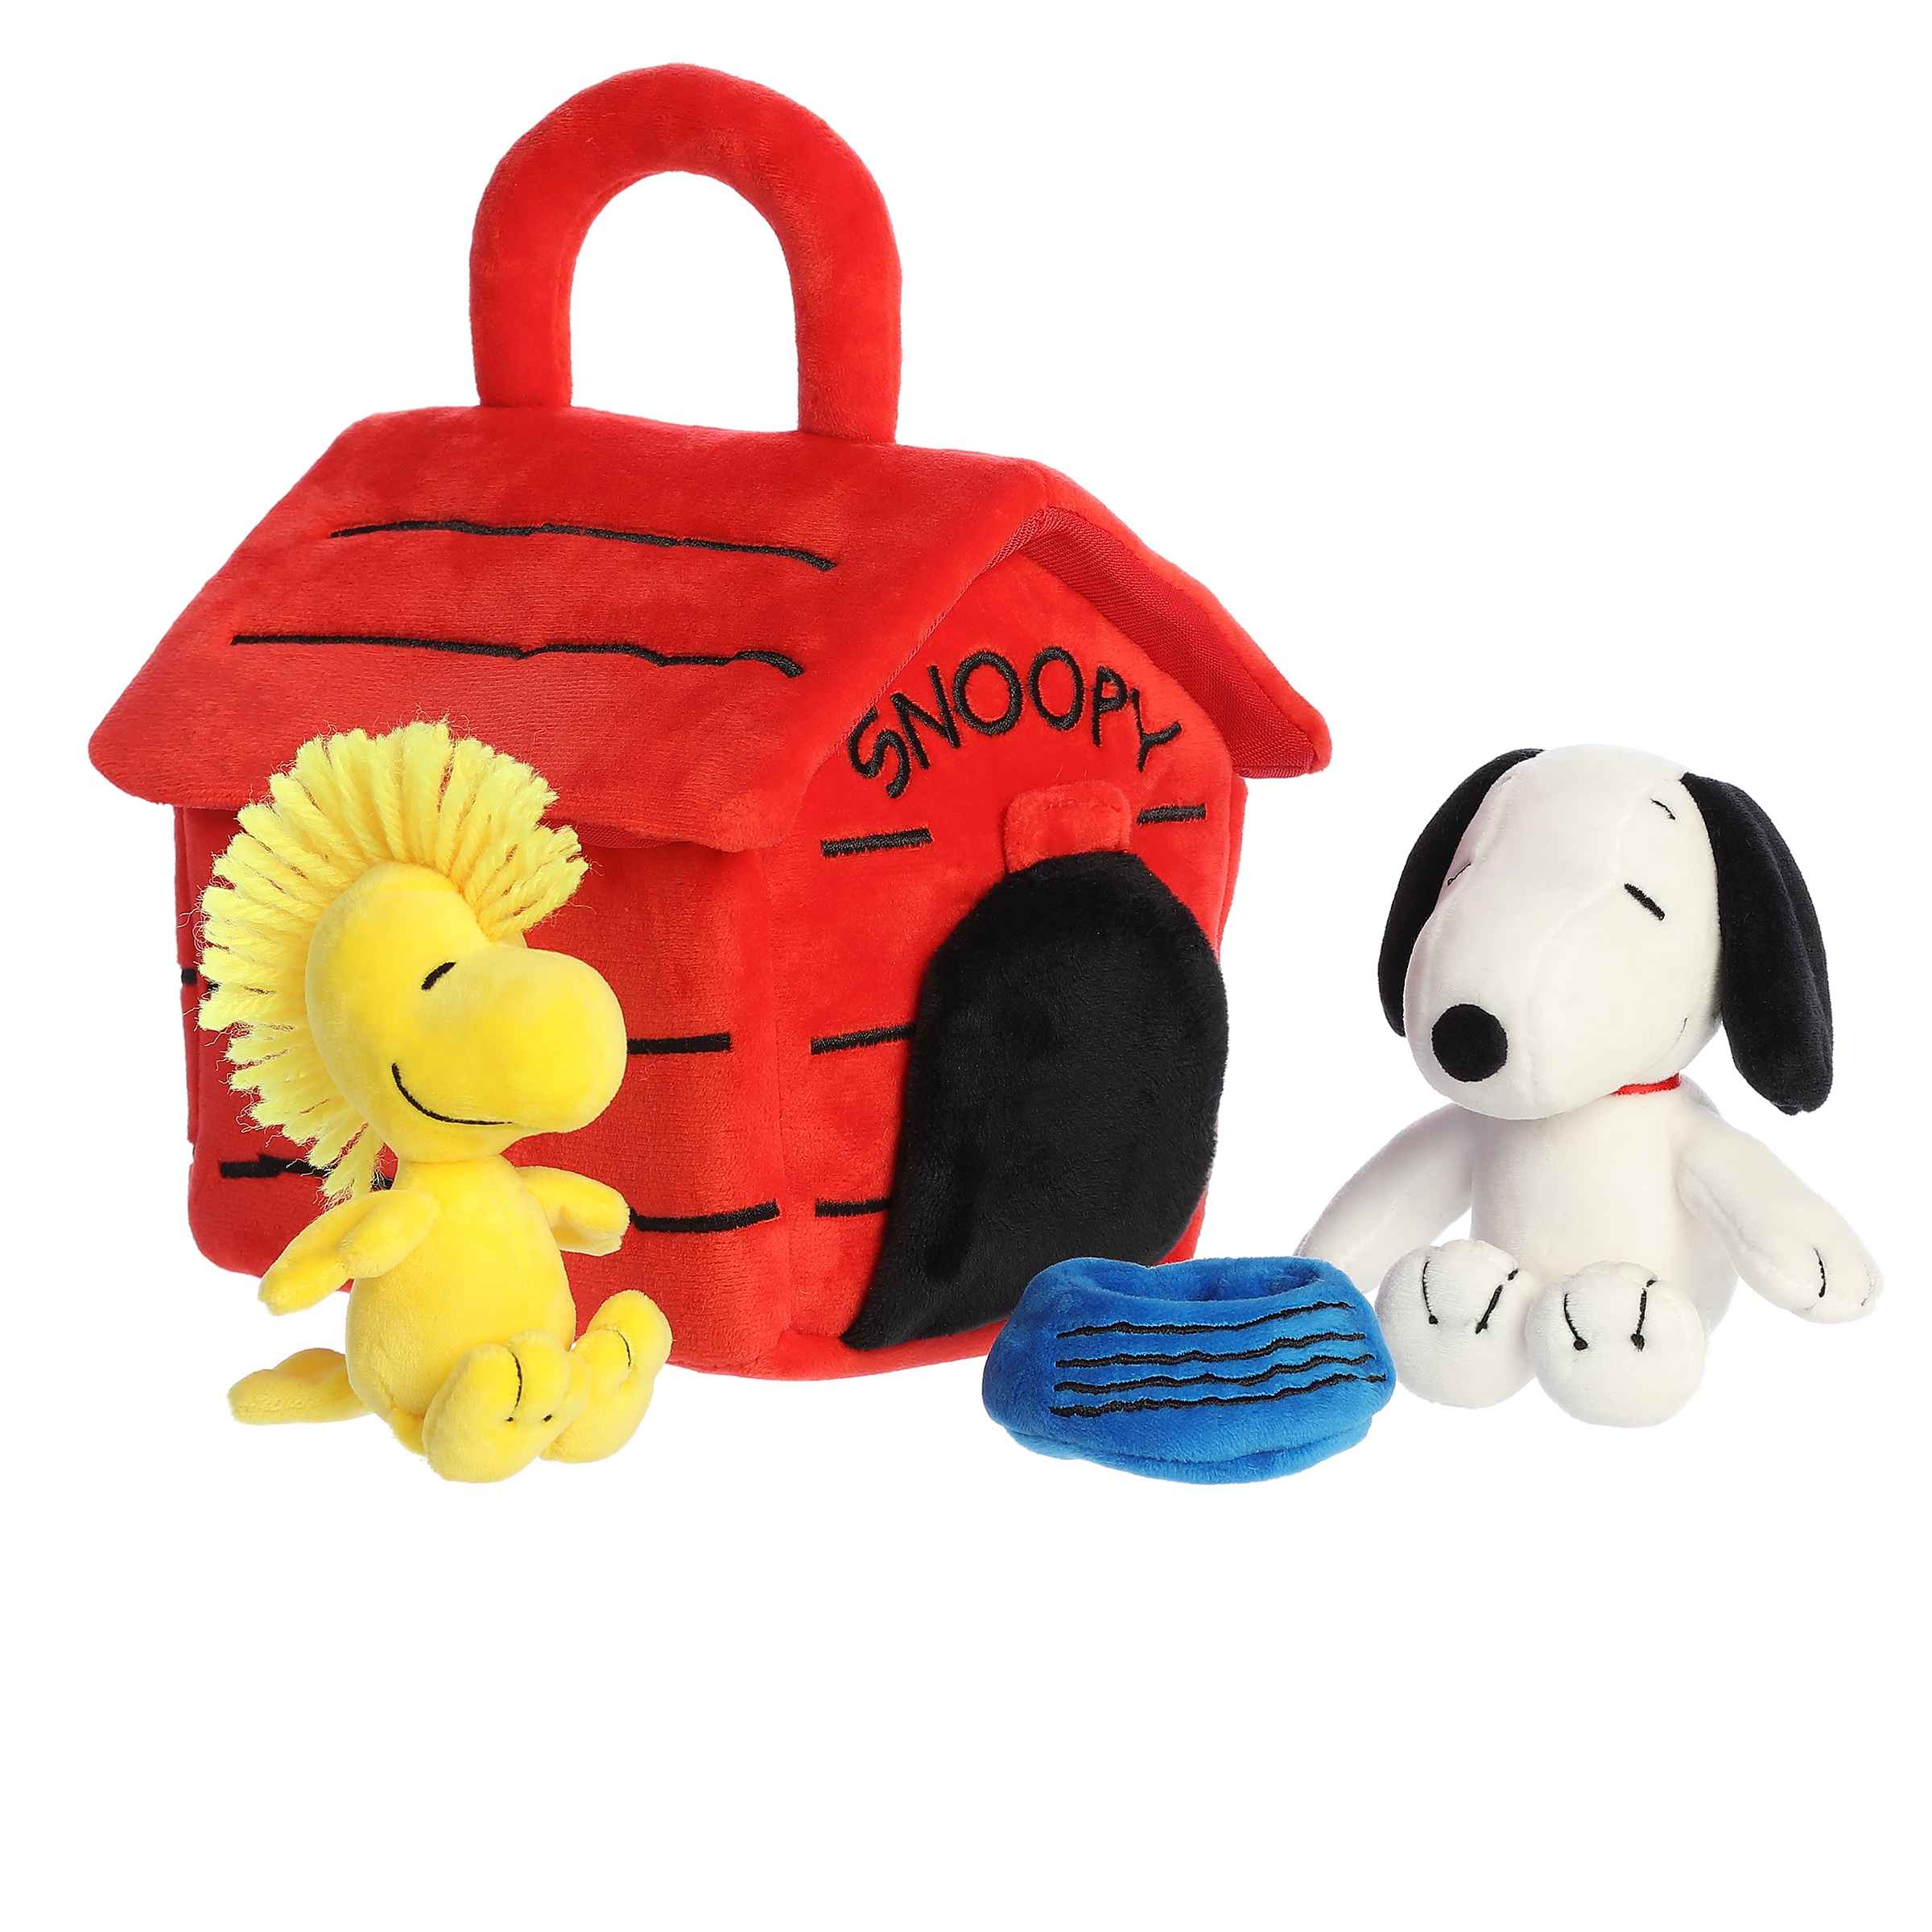 Snoopy's plush Dog House Playset by Aurora from Peanuts plush collection, with Snoopy, Woodstock, and his dog bowl